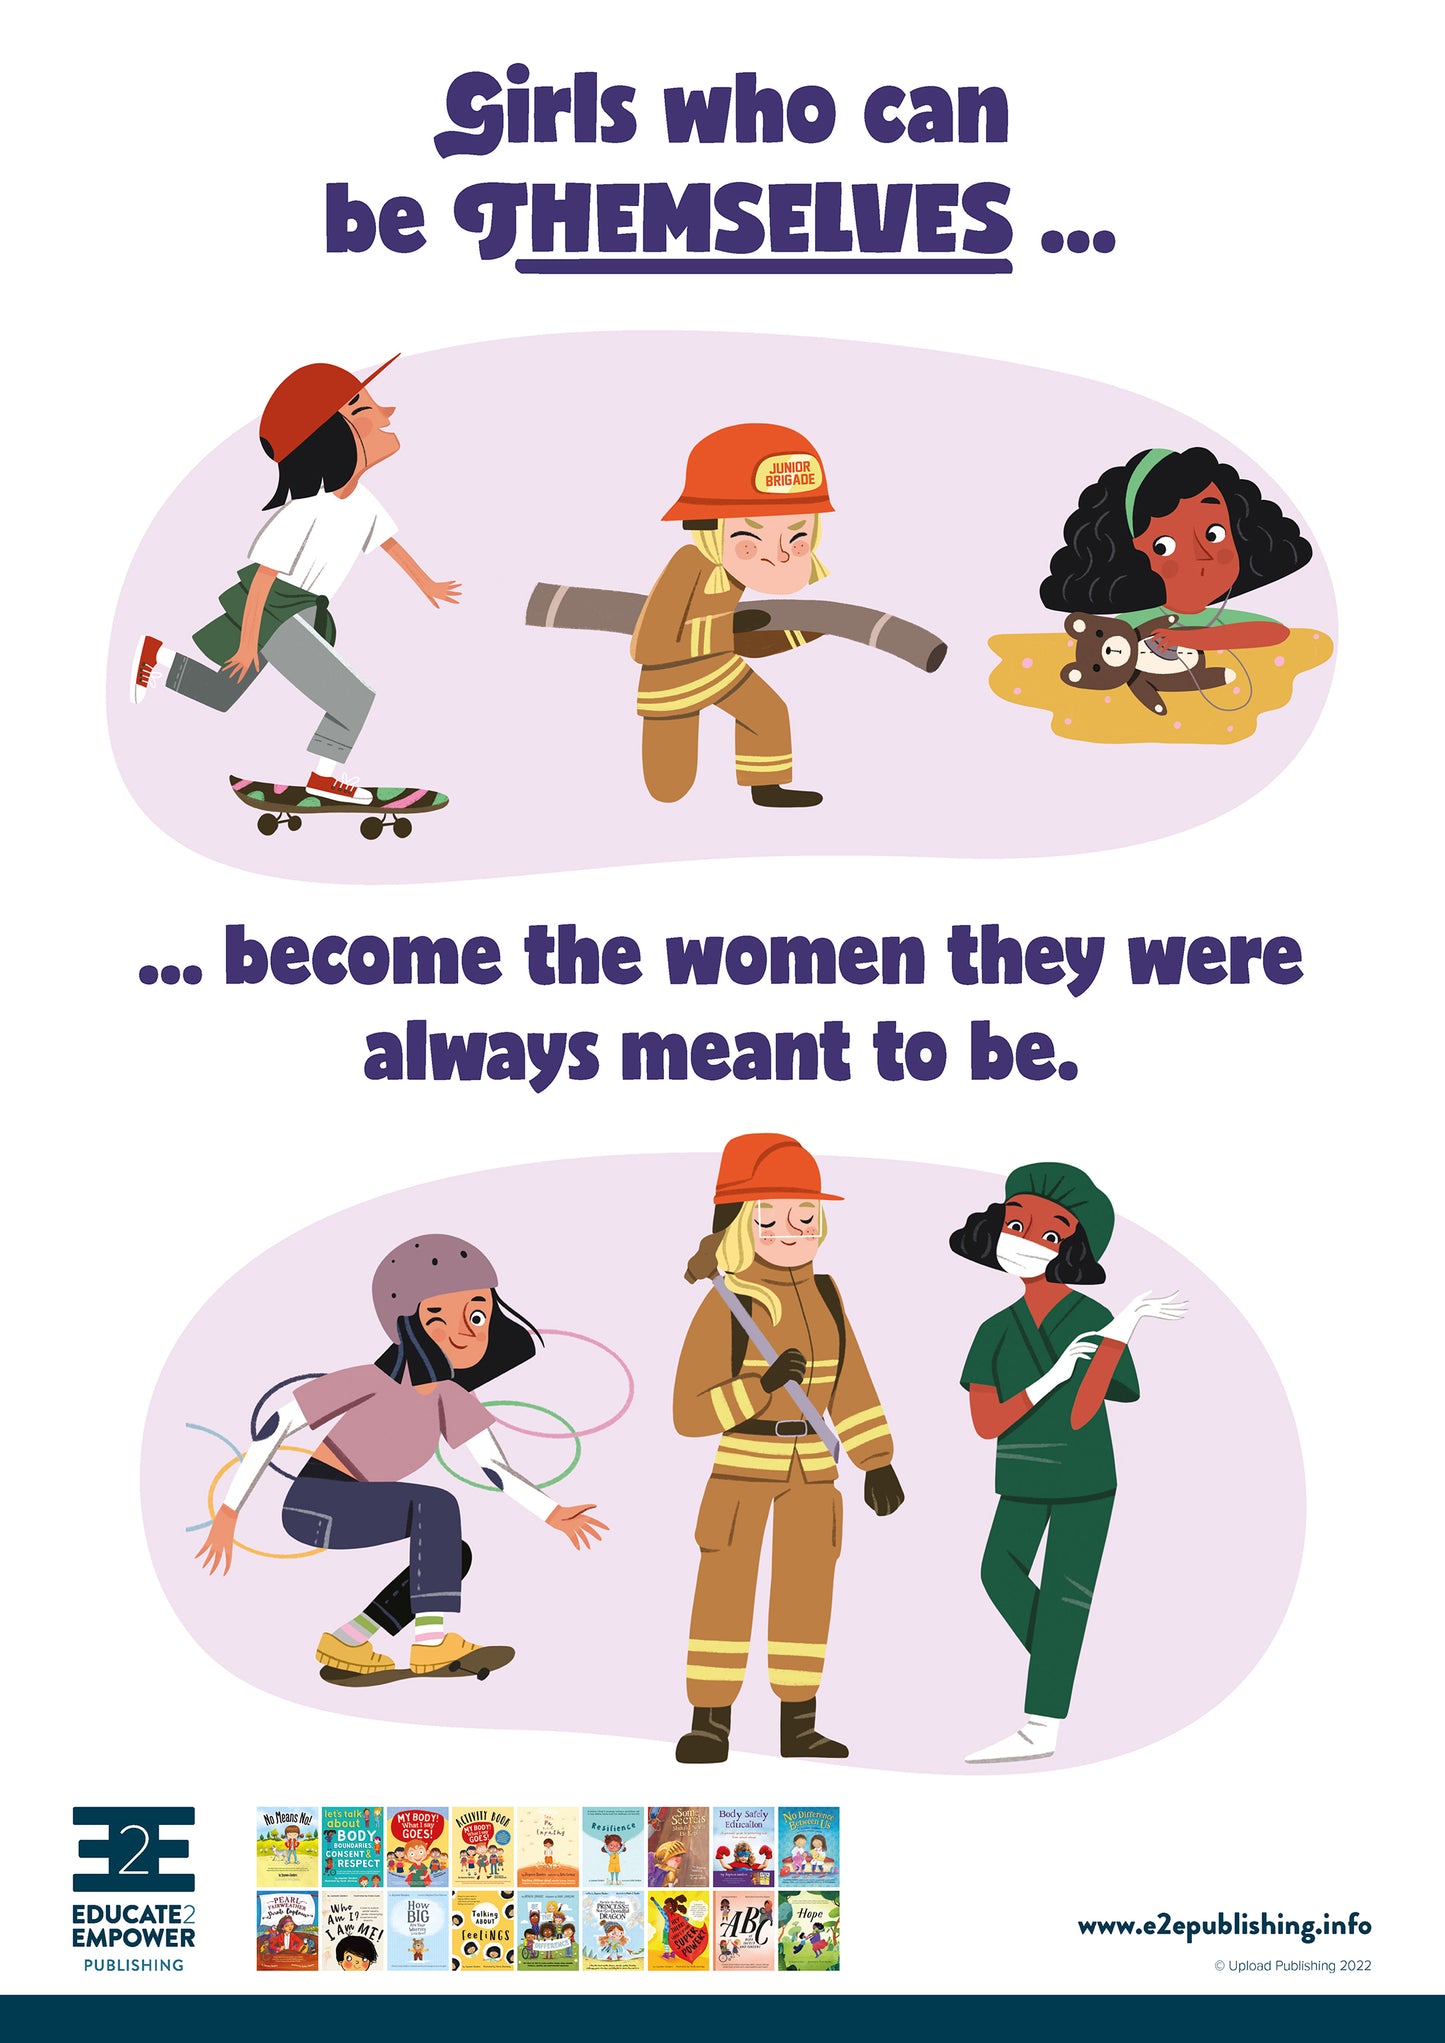 A poster for children titled 'Girls who can be themselves... become the women they were always meant to be."' containing cartoon images of young girls undertaking a variety of activities unbound by historical gender roles and below this images of the girls as adults undertaking occupations associated with these activities..